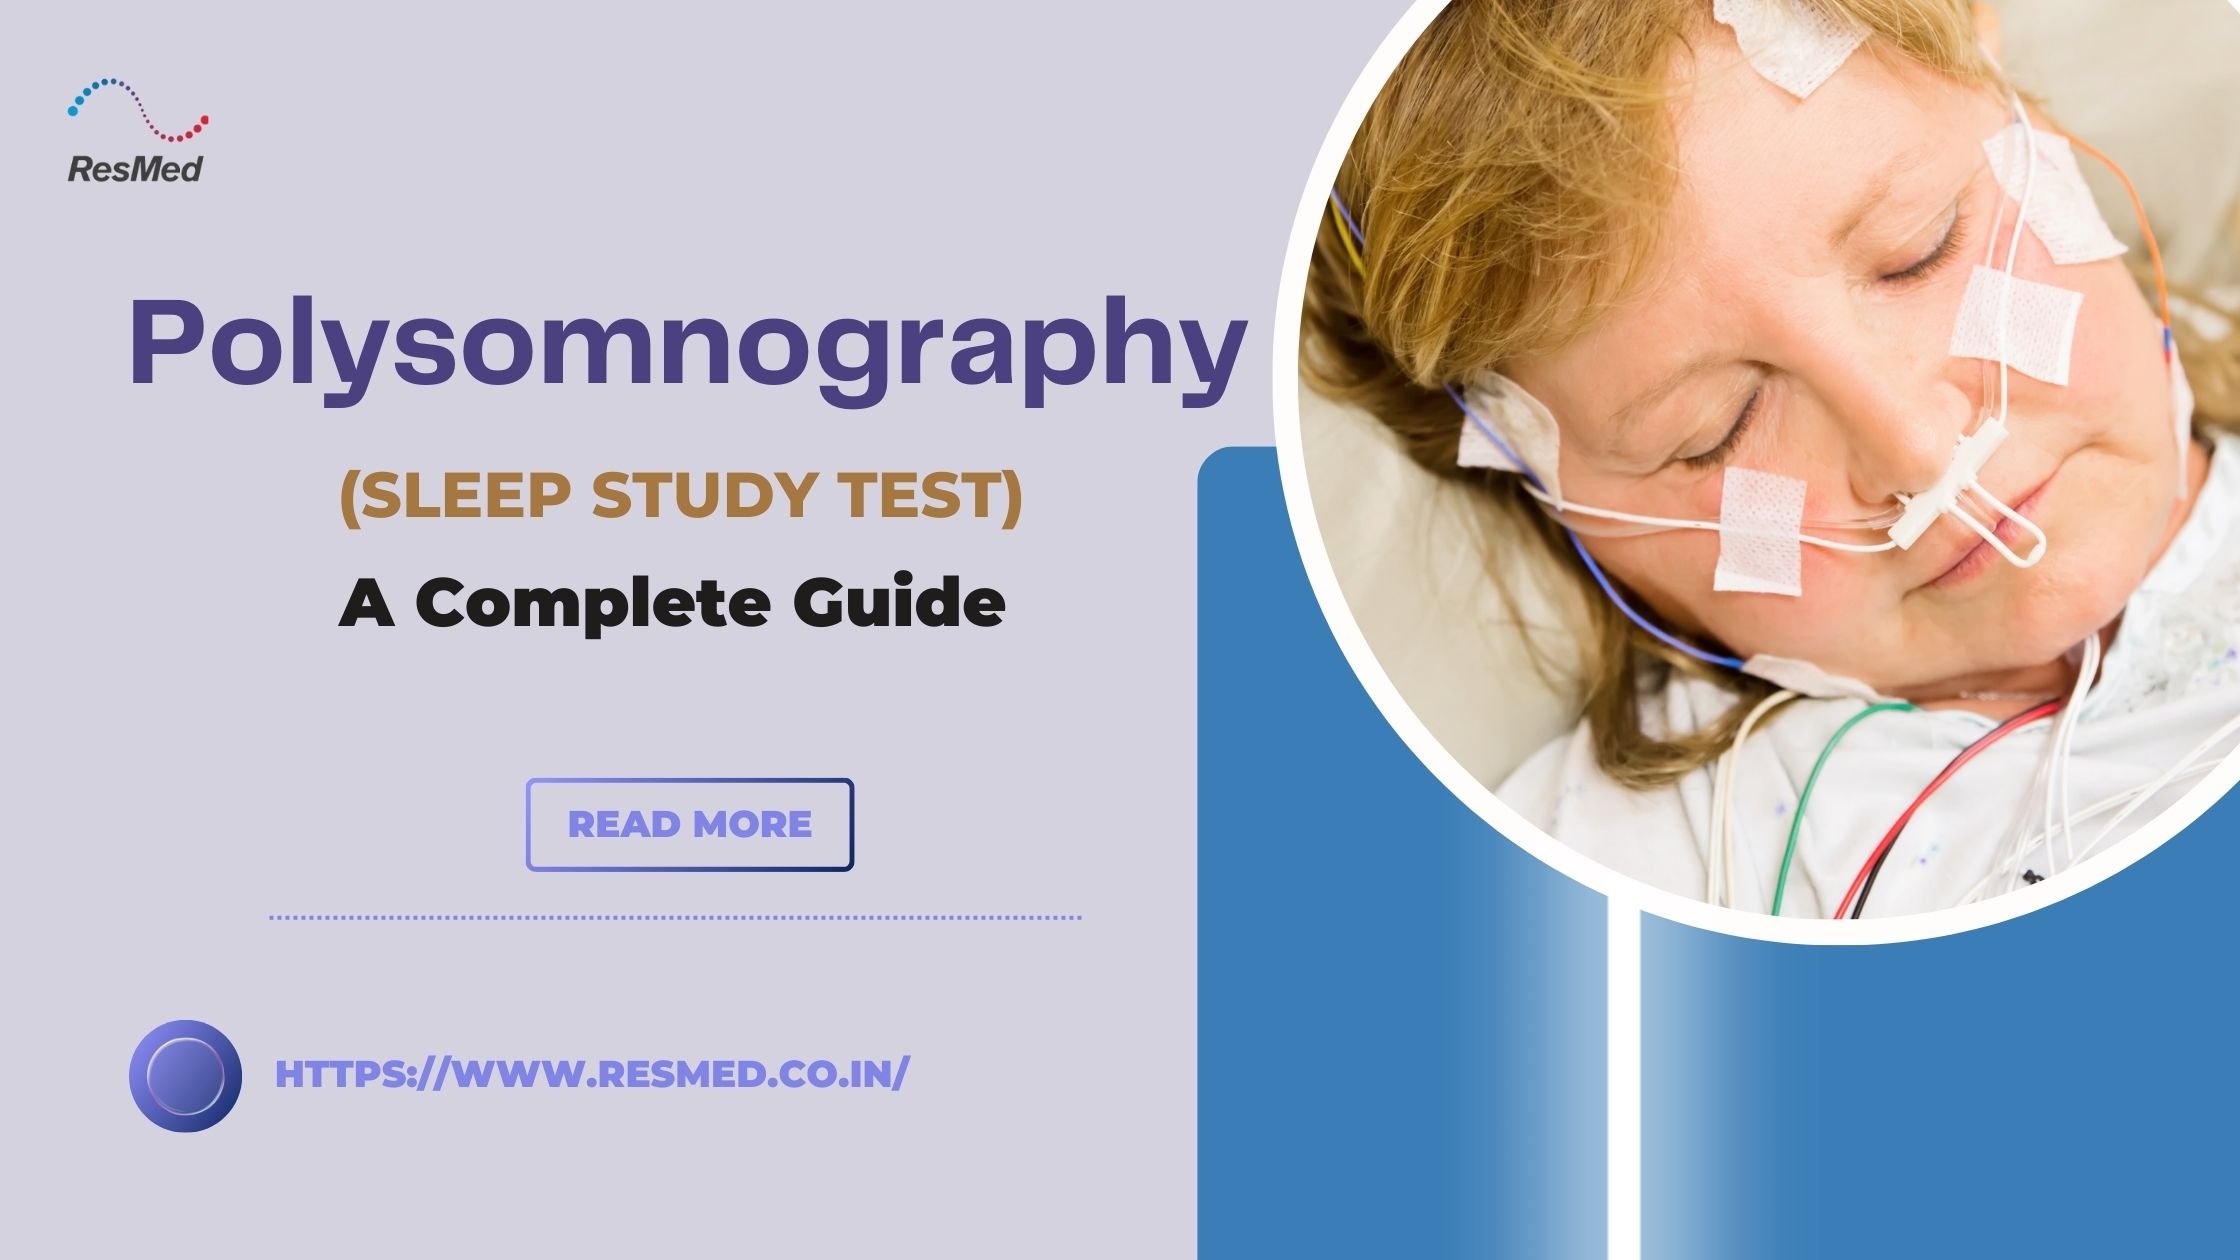 Polysomnography (Sleep Study) Test: A Complete Guide